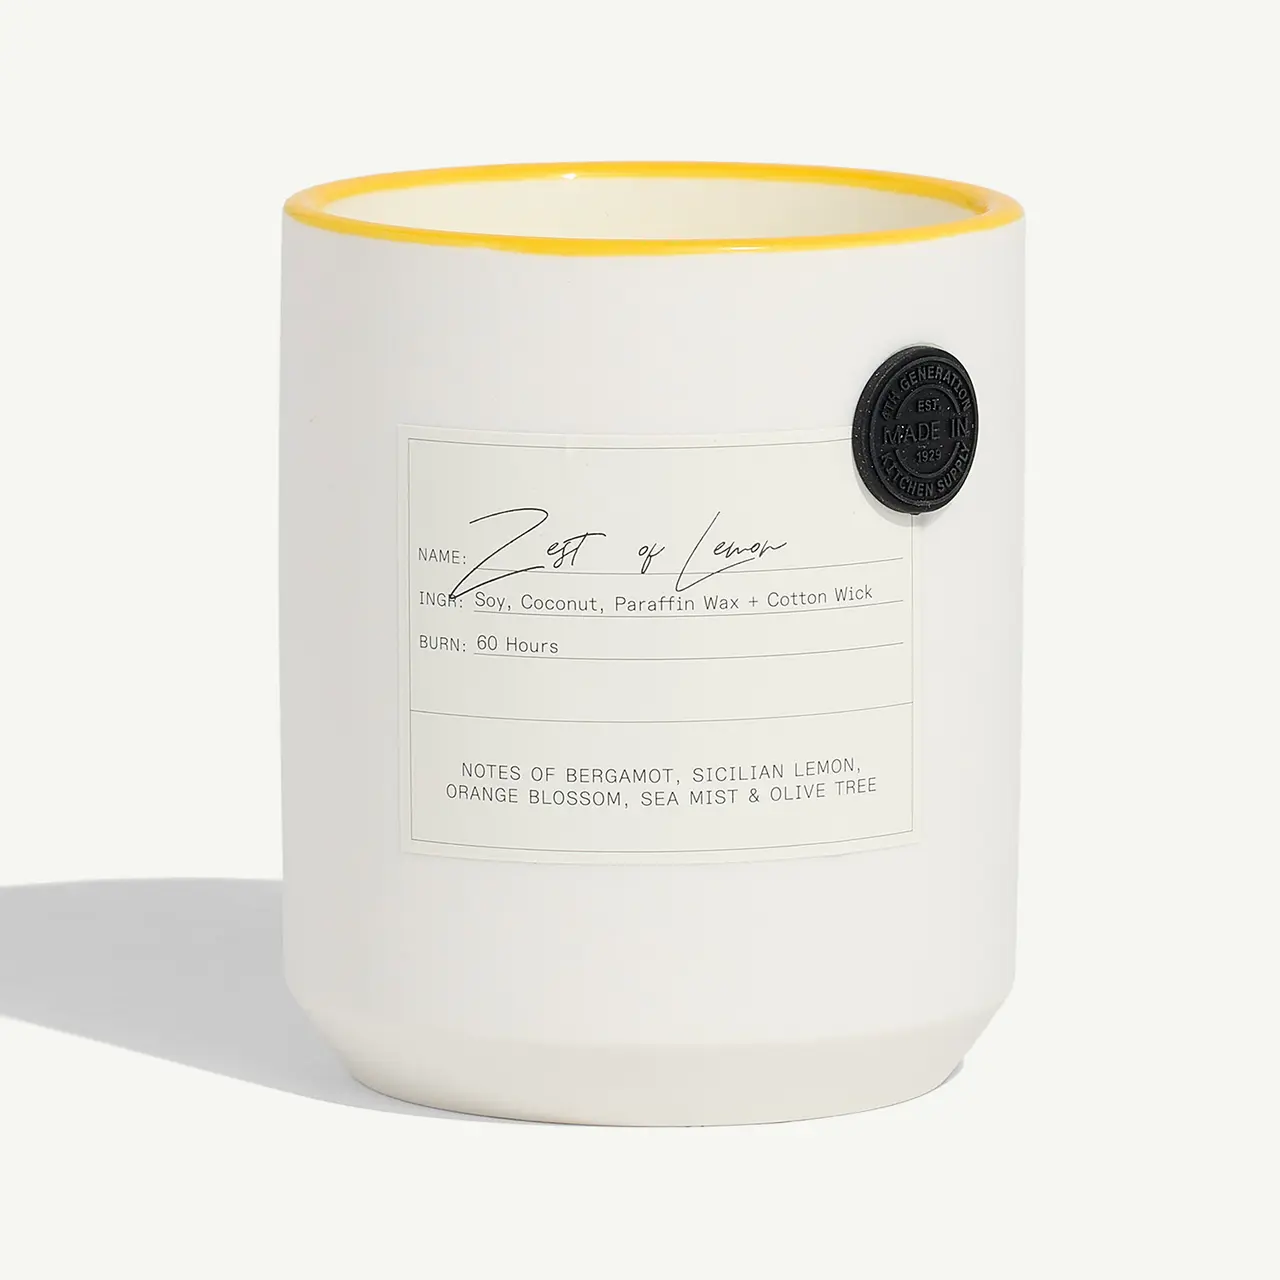 A white candle with a yellow rim and a description label detailing its scent components and burn time, alongside a black circular emblem.